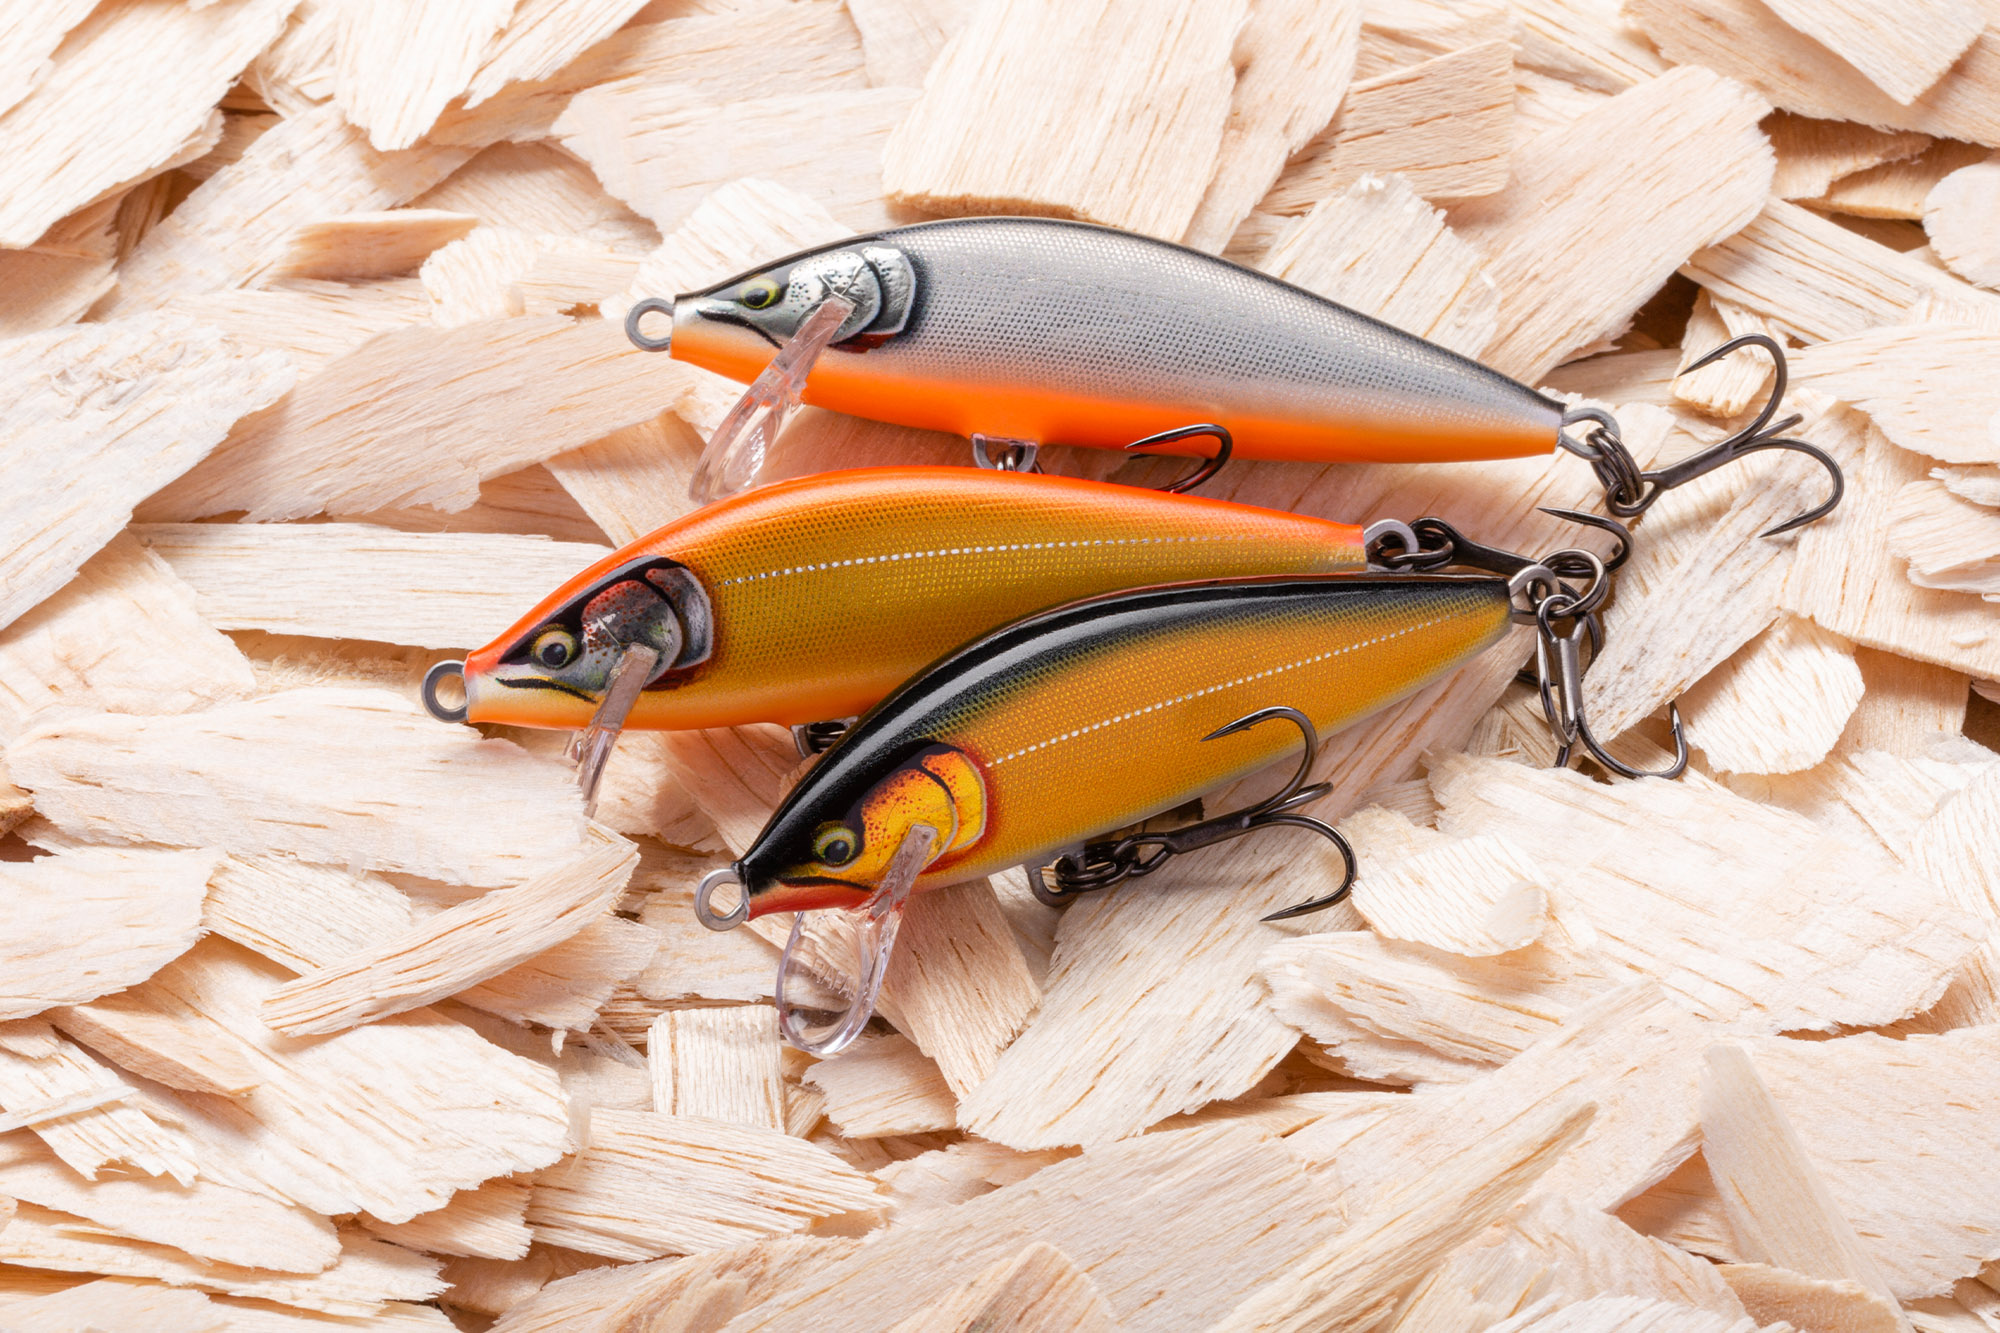 From an Idea to a Best-Seller: How the CountDown Elite was Born - Rapala VMC